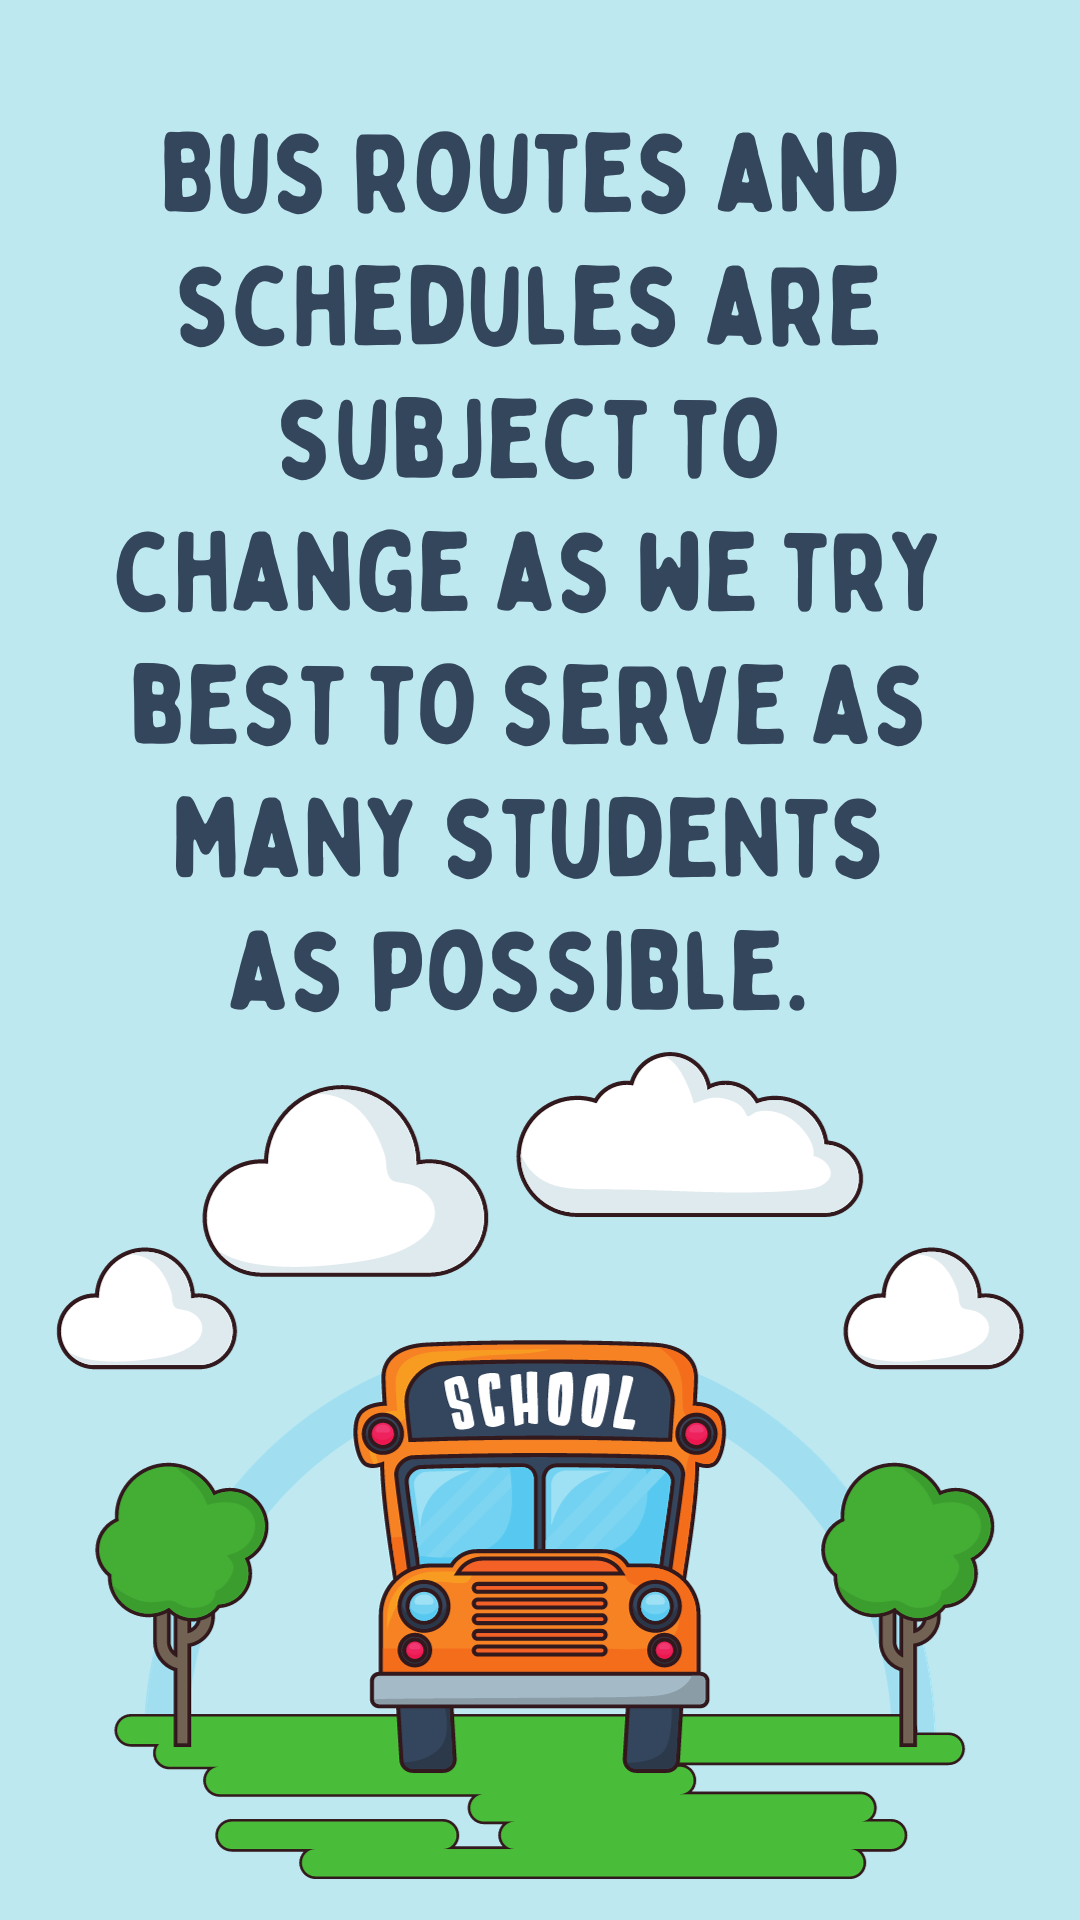 Bus routes and schedules are subject to change as we try best to serve as many students as possible. 